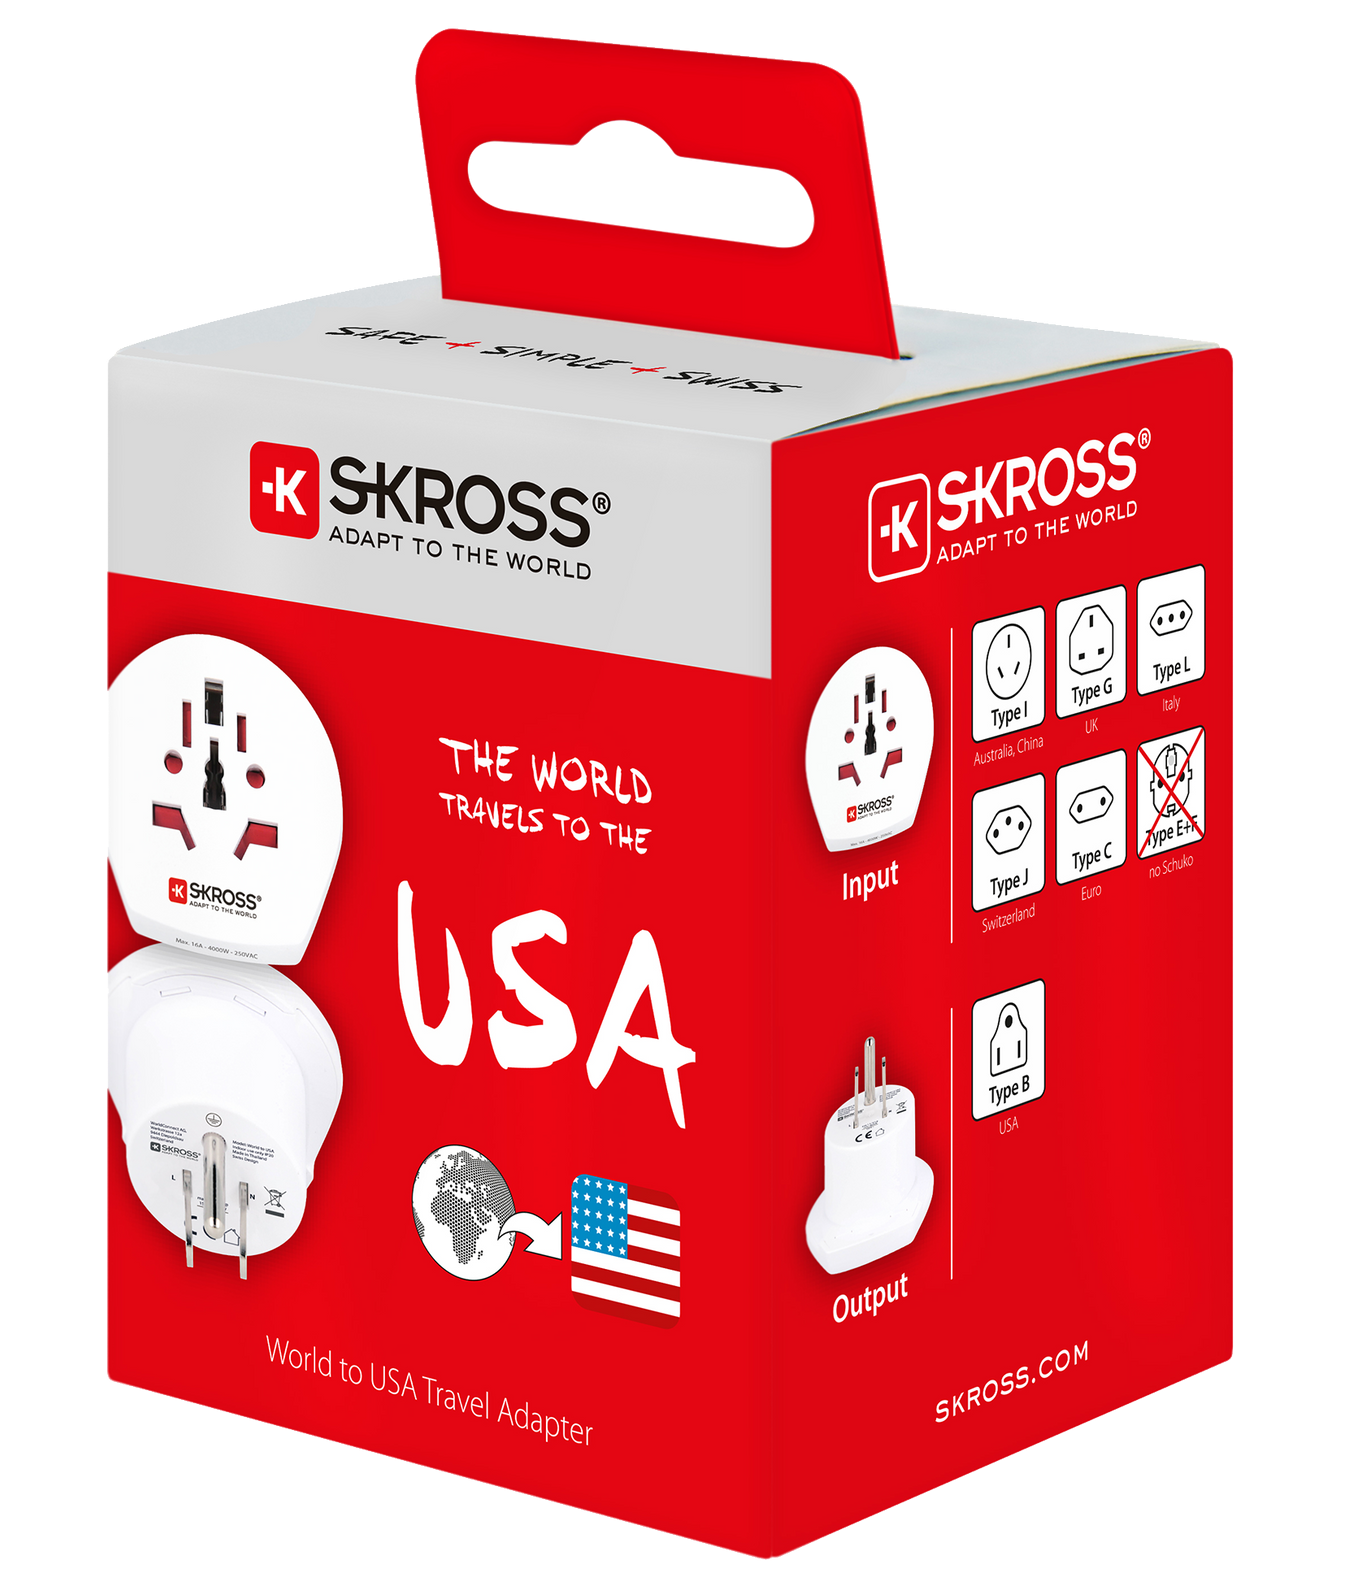 Skross 3-Pole World to USA Travel Adapter Packaging